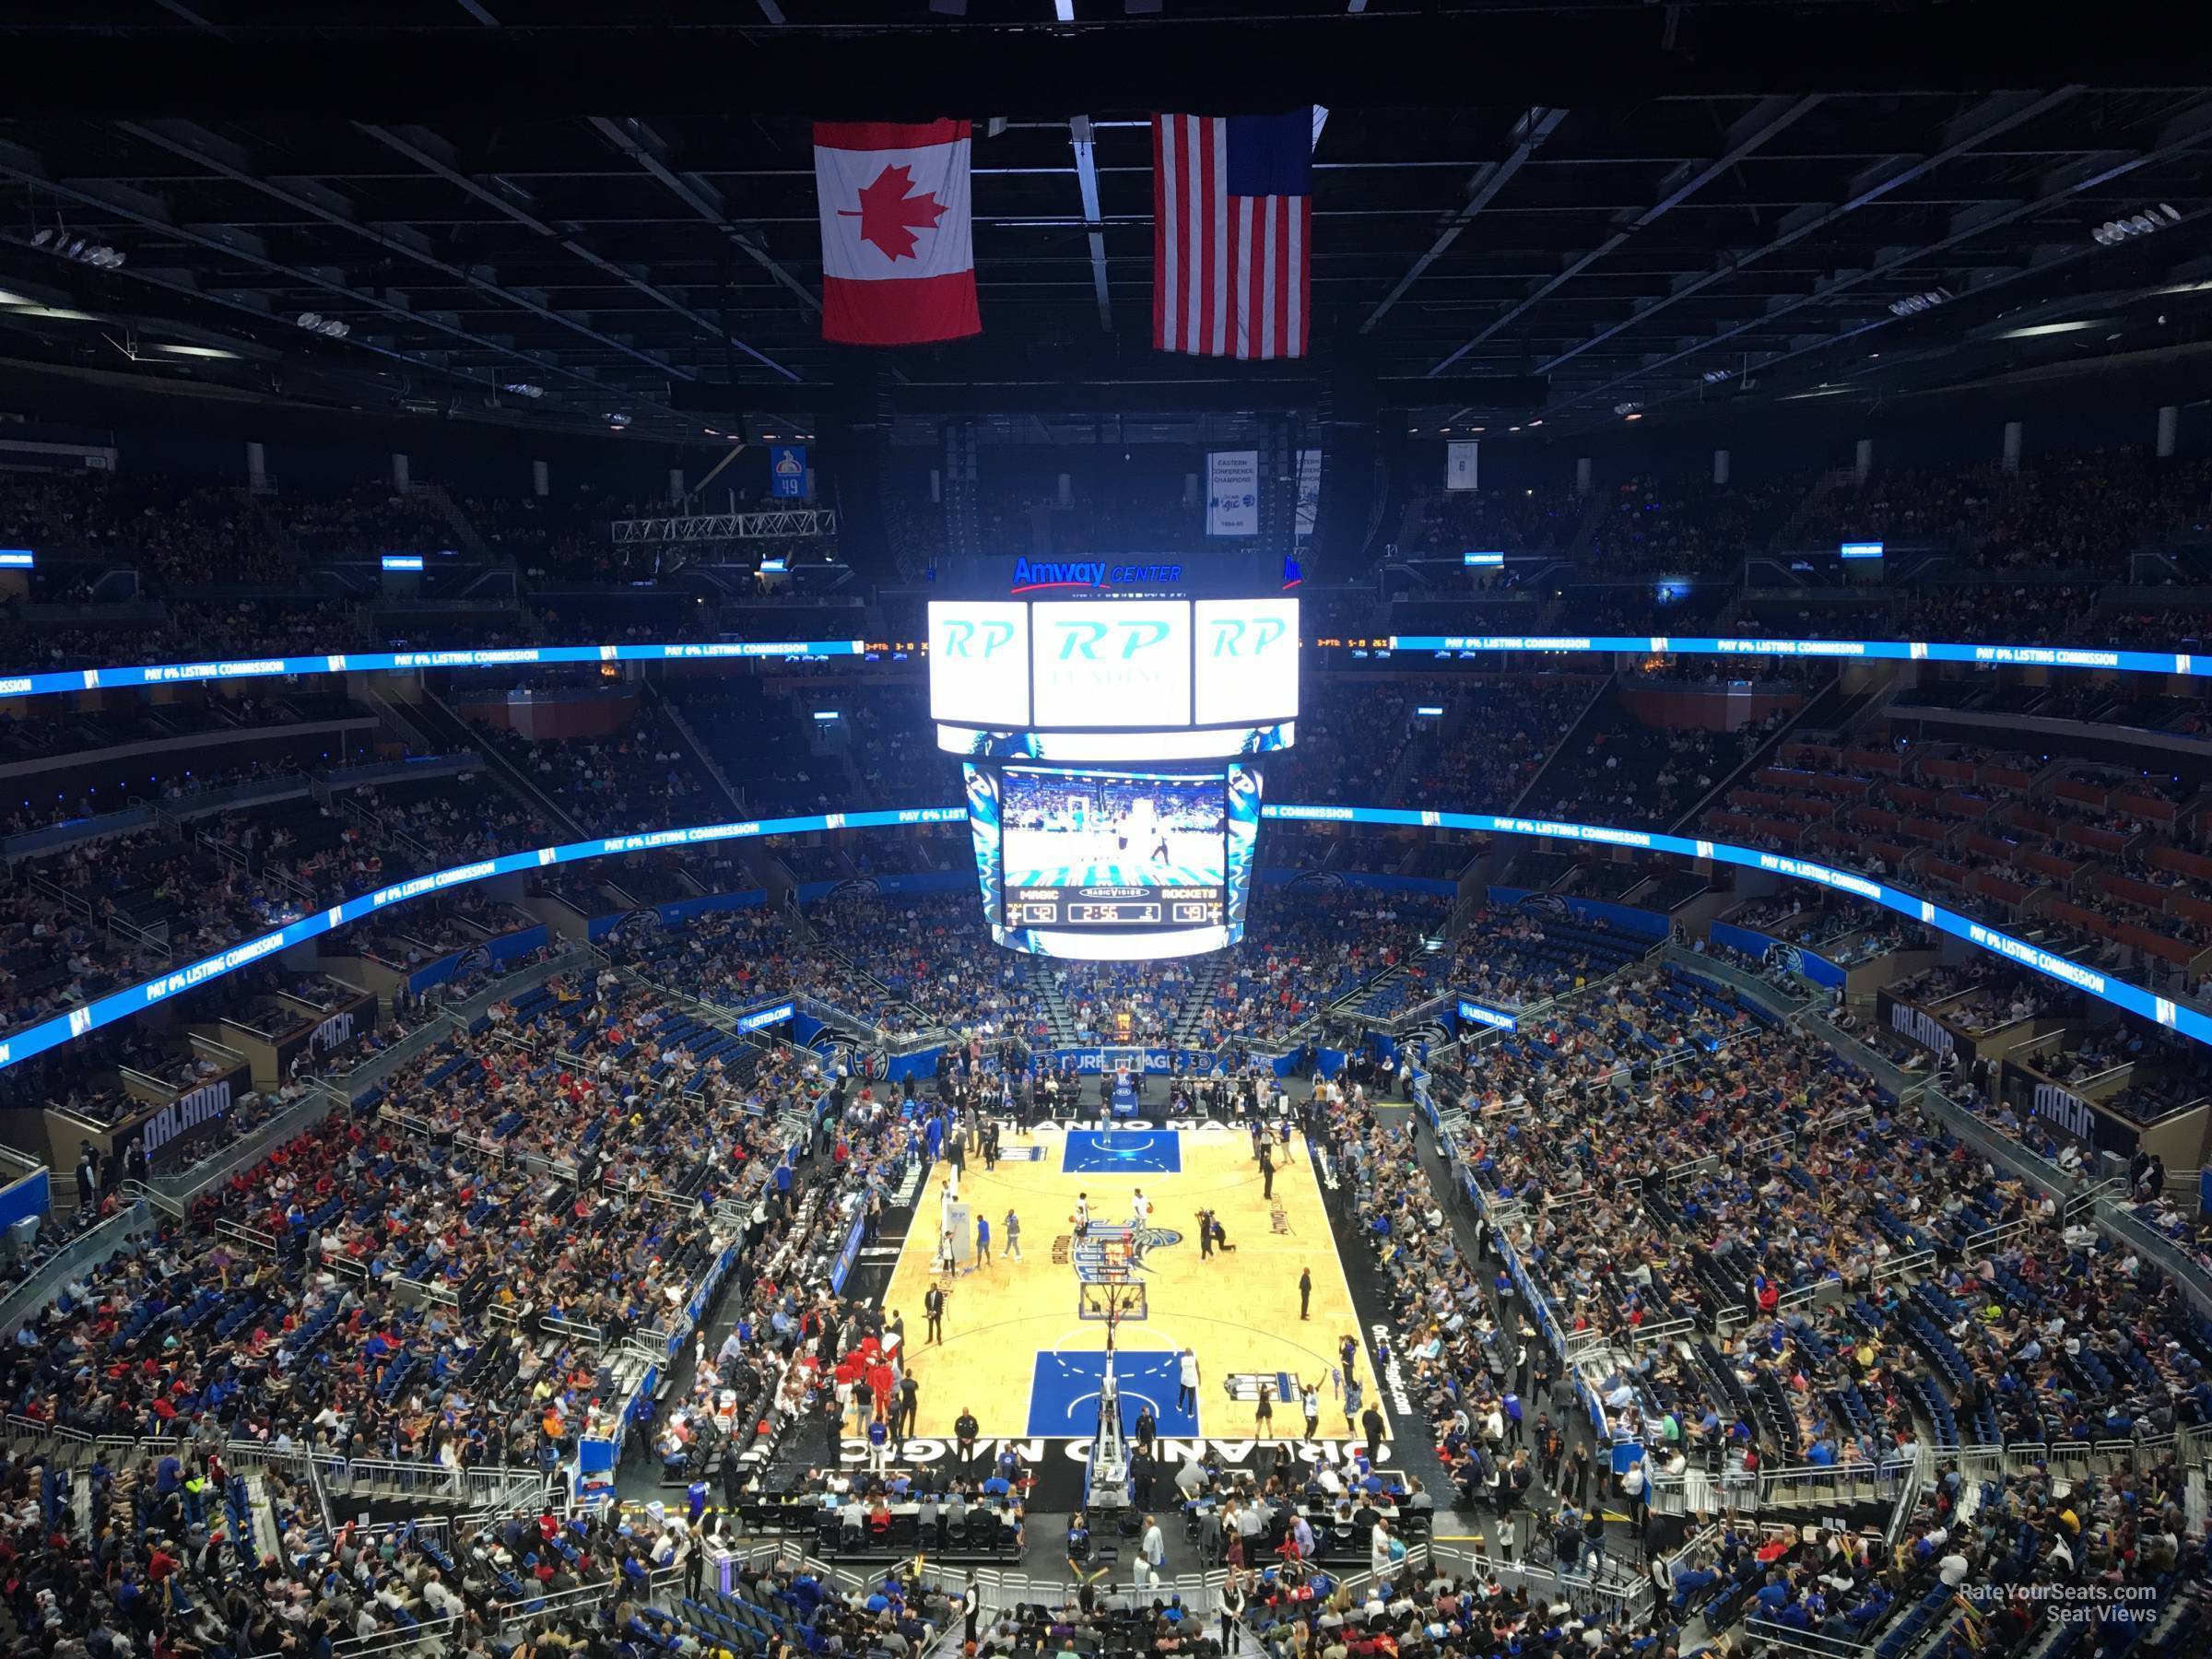 section 201, row 5 seat view  for basketball - amway center